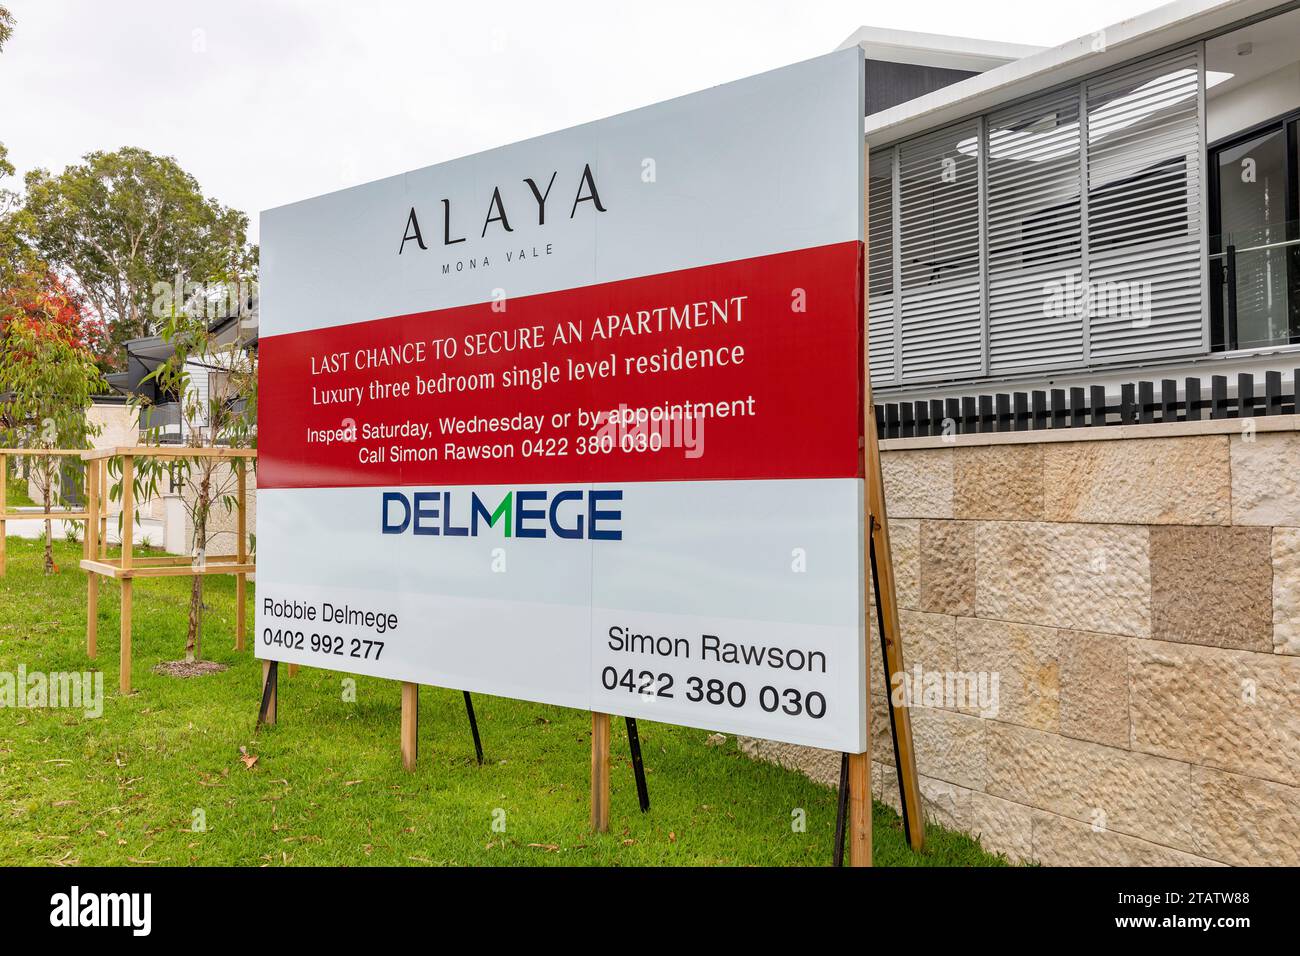 New apartments units built in Mona Vale Sydney, agent Deluge with large marketing board promoting last chance to buy apartment unit,Sydney,Australia Stock Photo